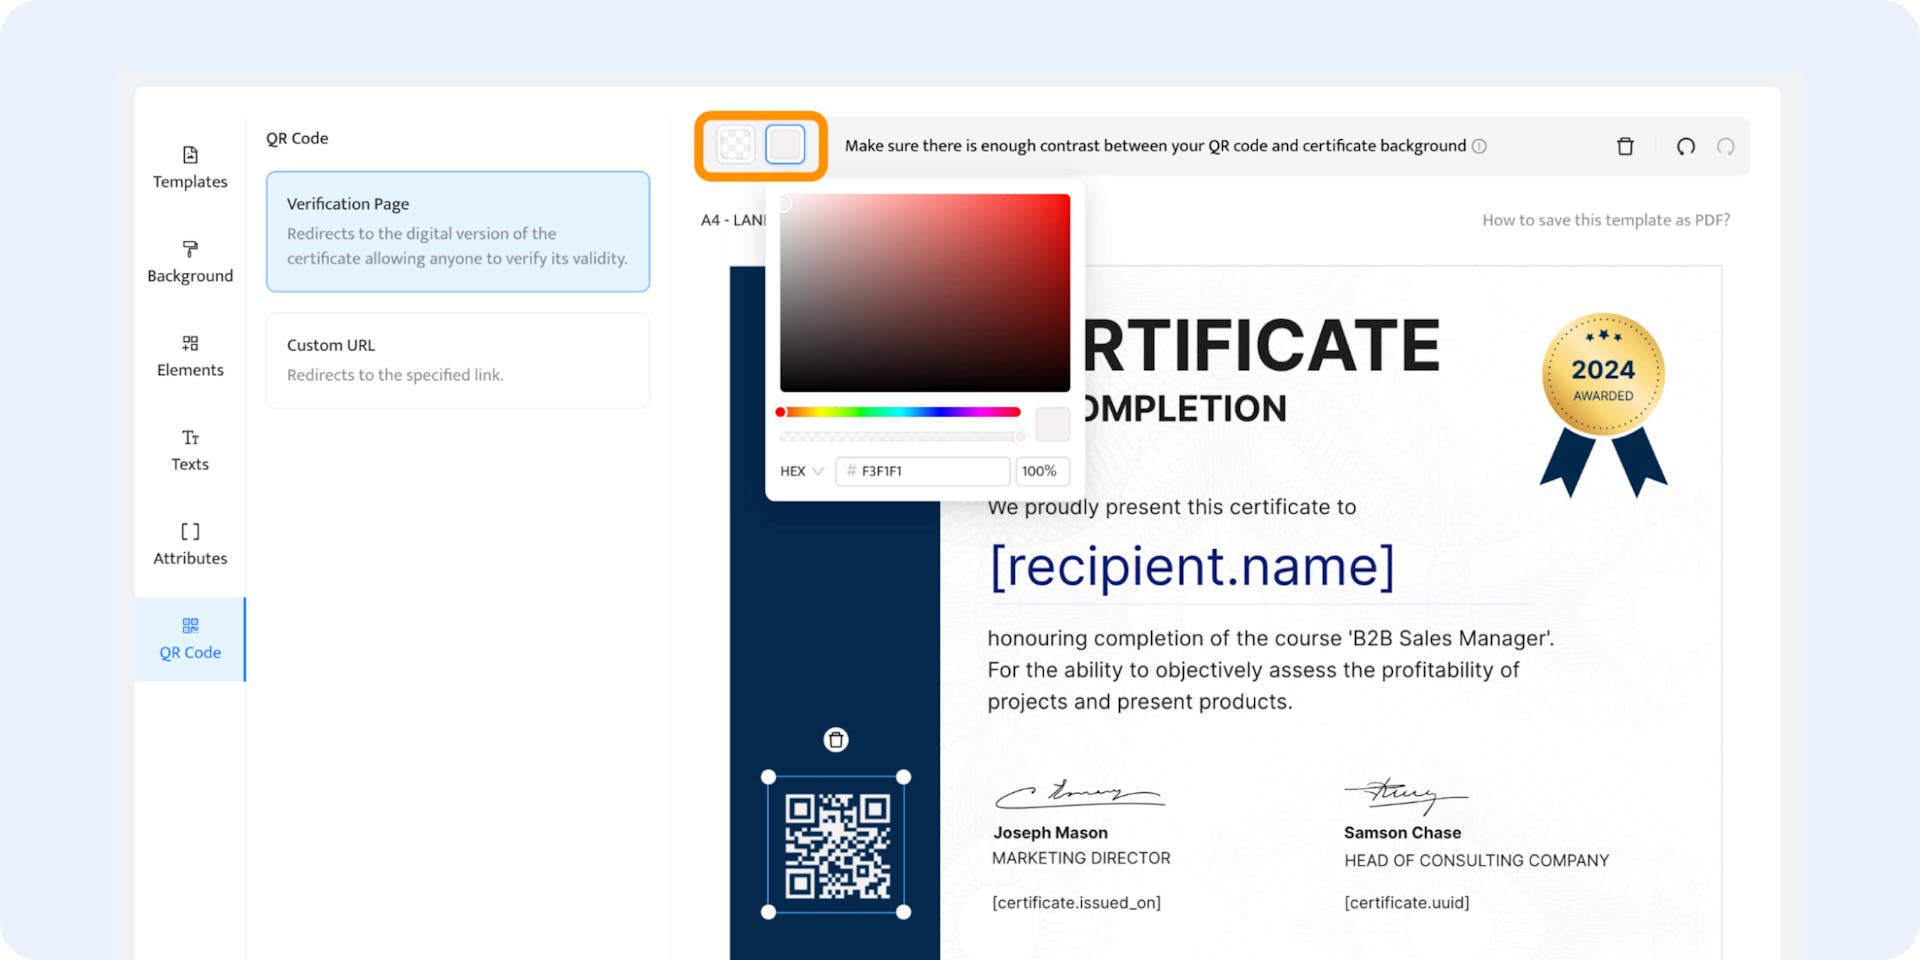 Changing the QR code color within the Certifier dashboard.